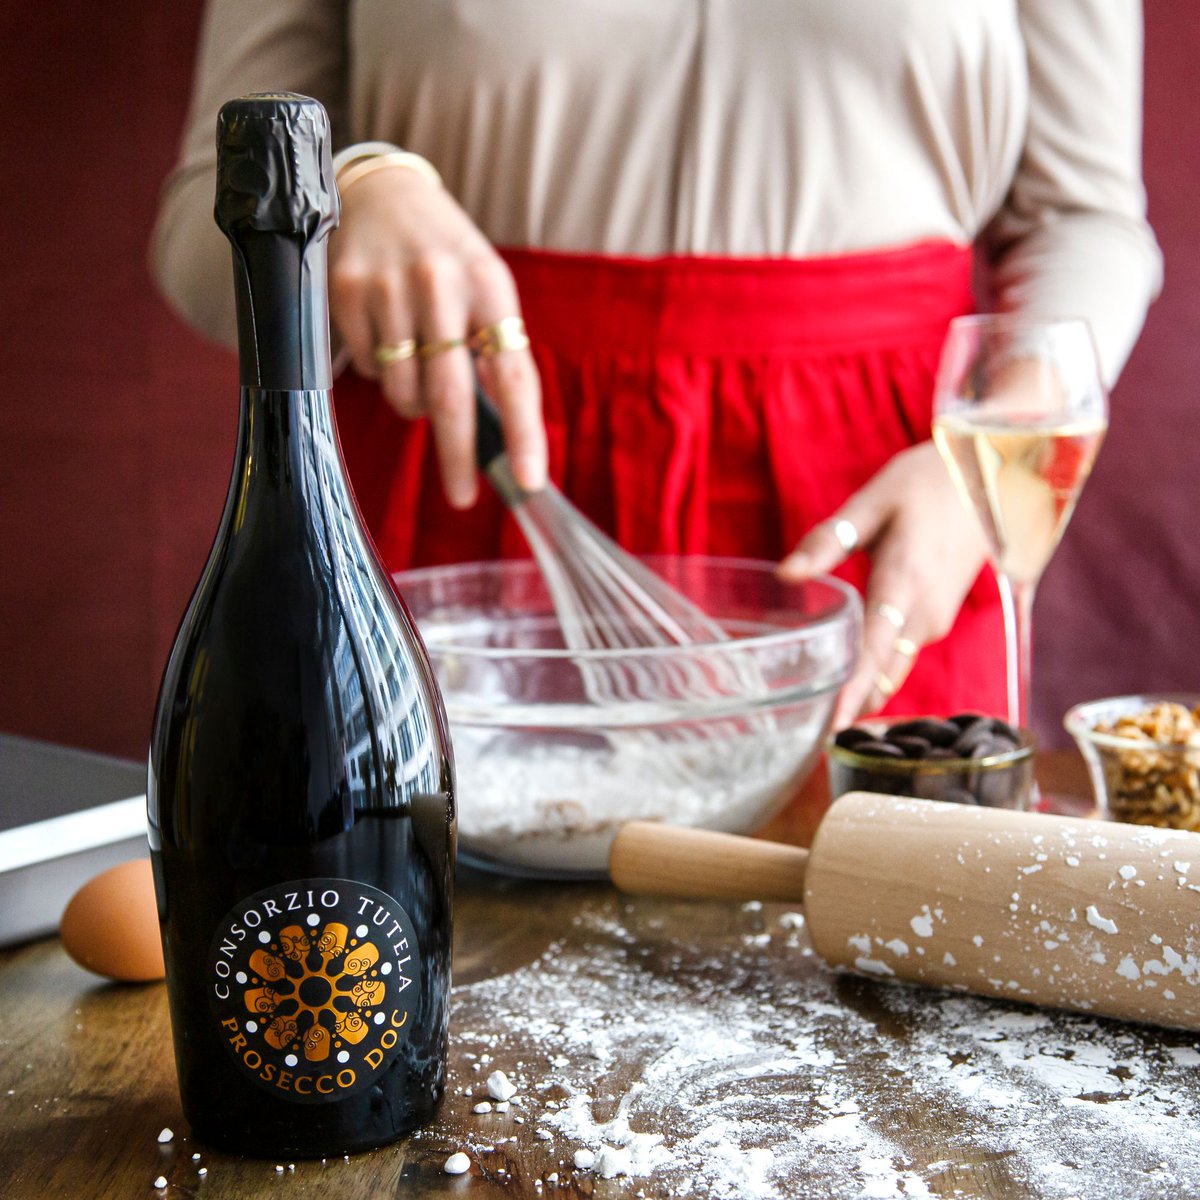 It’s the beginning of '@cakeweekuk & we’d love to know what you’ll be baking this week to celebrate! 🎂

Our #proseccodoc makes a great pairing for your sweet treats – choose a Prosecco DOC Extra Dry for your chocolate creations or a Rosé for a classic Victoria sponge style